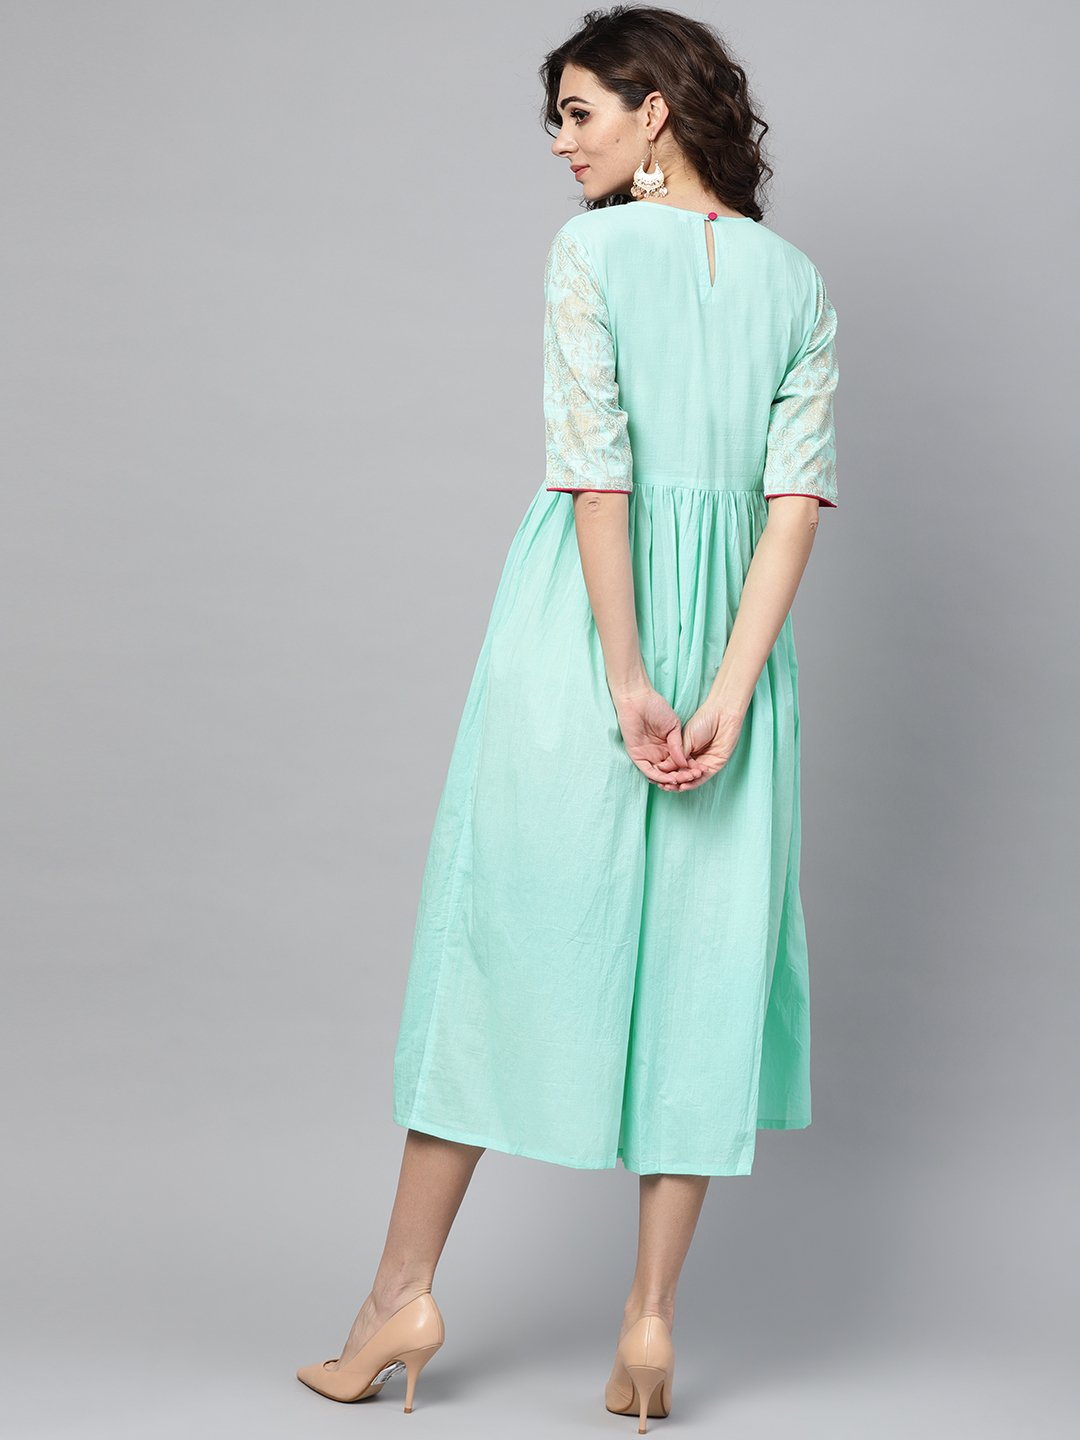 Women's Pastel Green Dress With Front Gold Printed Yoke & 3/4 Sleeves - Nayo Clothing